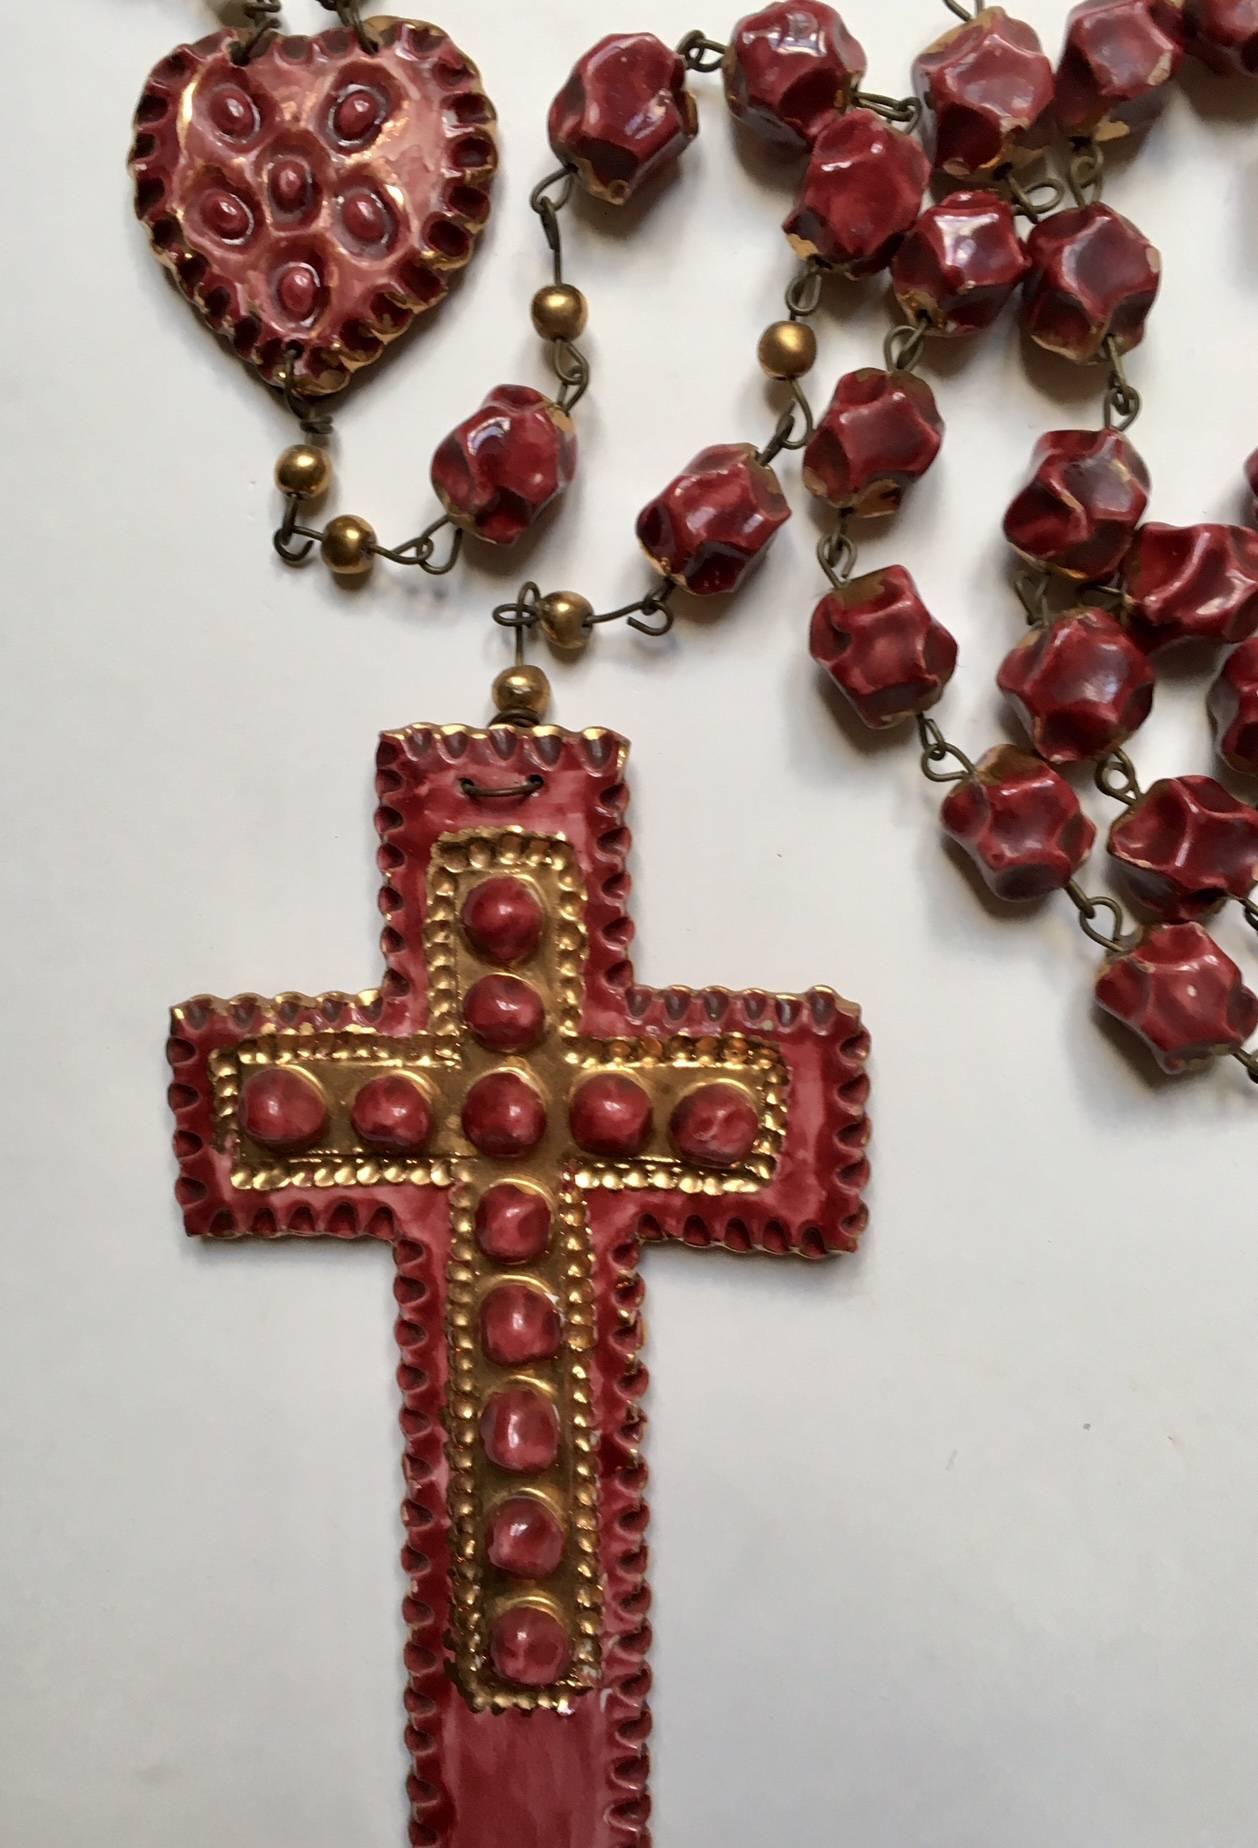 A massive Mazzotti rare ceramic rosary by renowned manufacturer VMA (mazzotti) Albisola, Italy,
circa 1970.
Purple and gold ceramic and gold plated metal fixtures.
Full length 200 cm (the cross only measure 24x14 cm)
stamped VMA ESA.

  